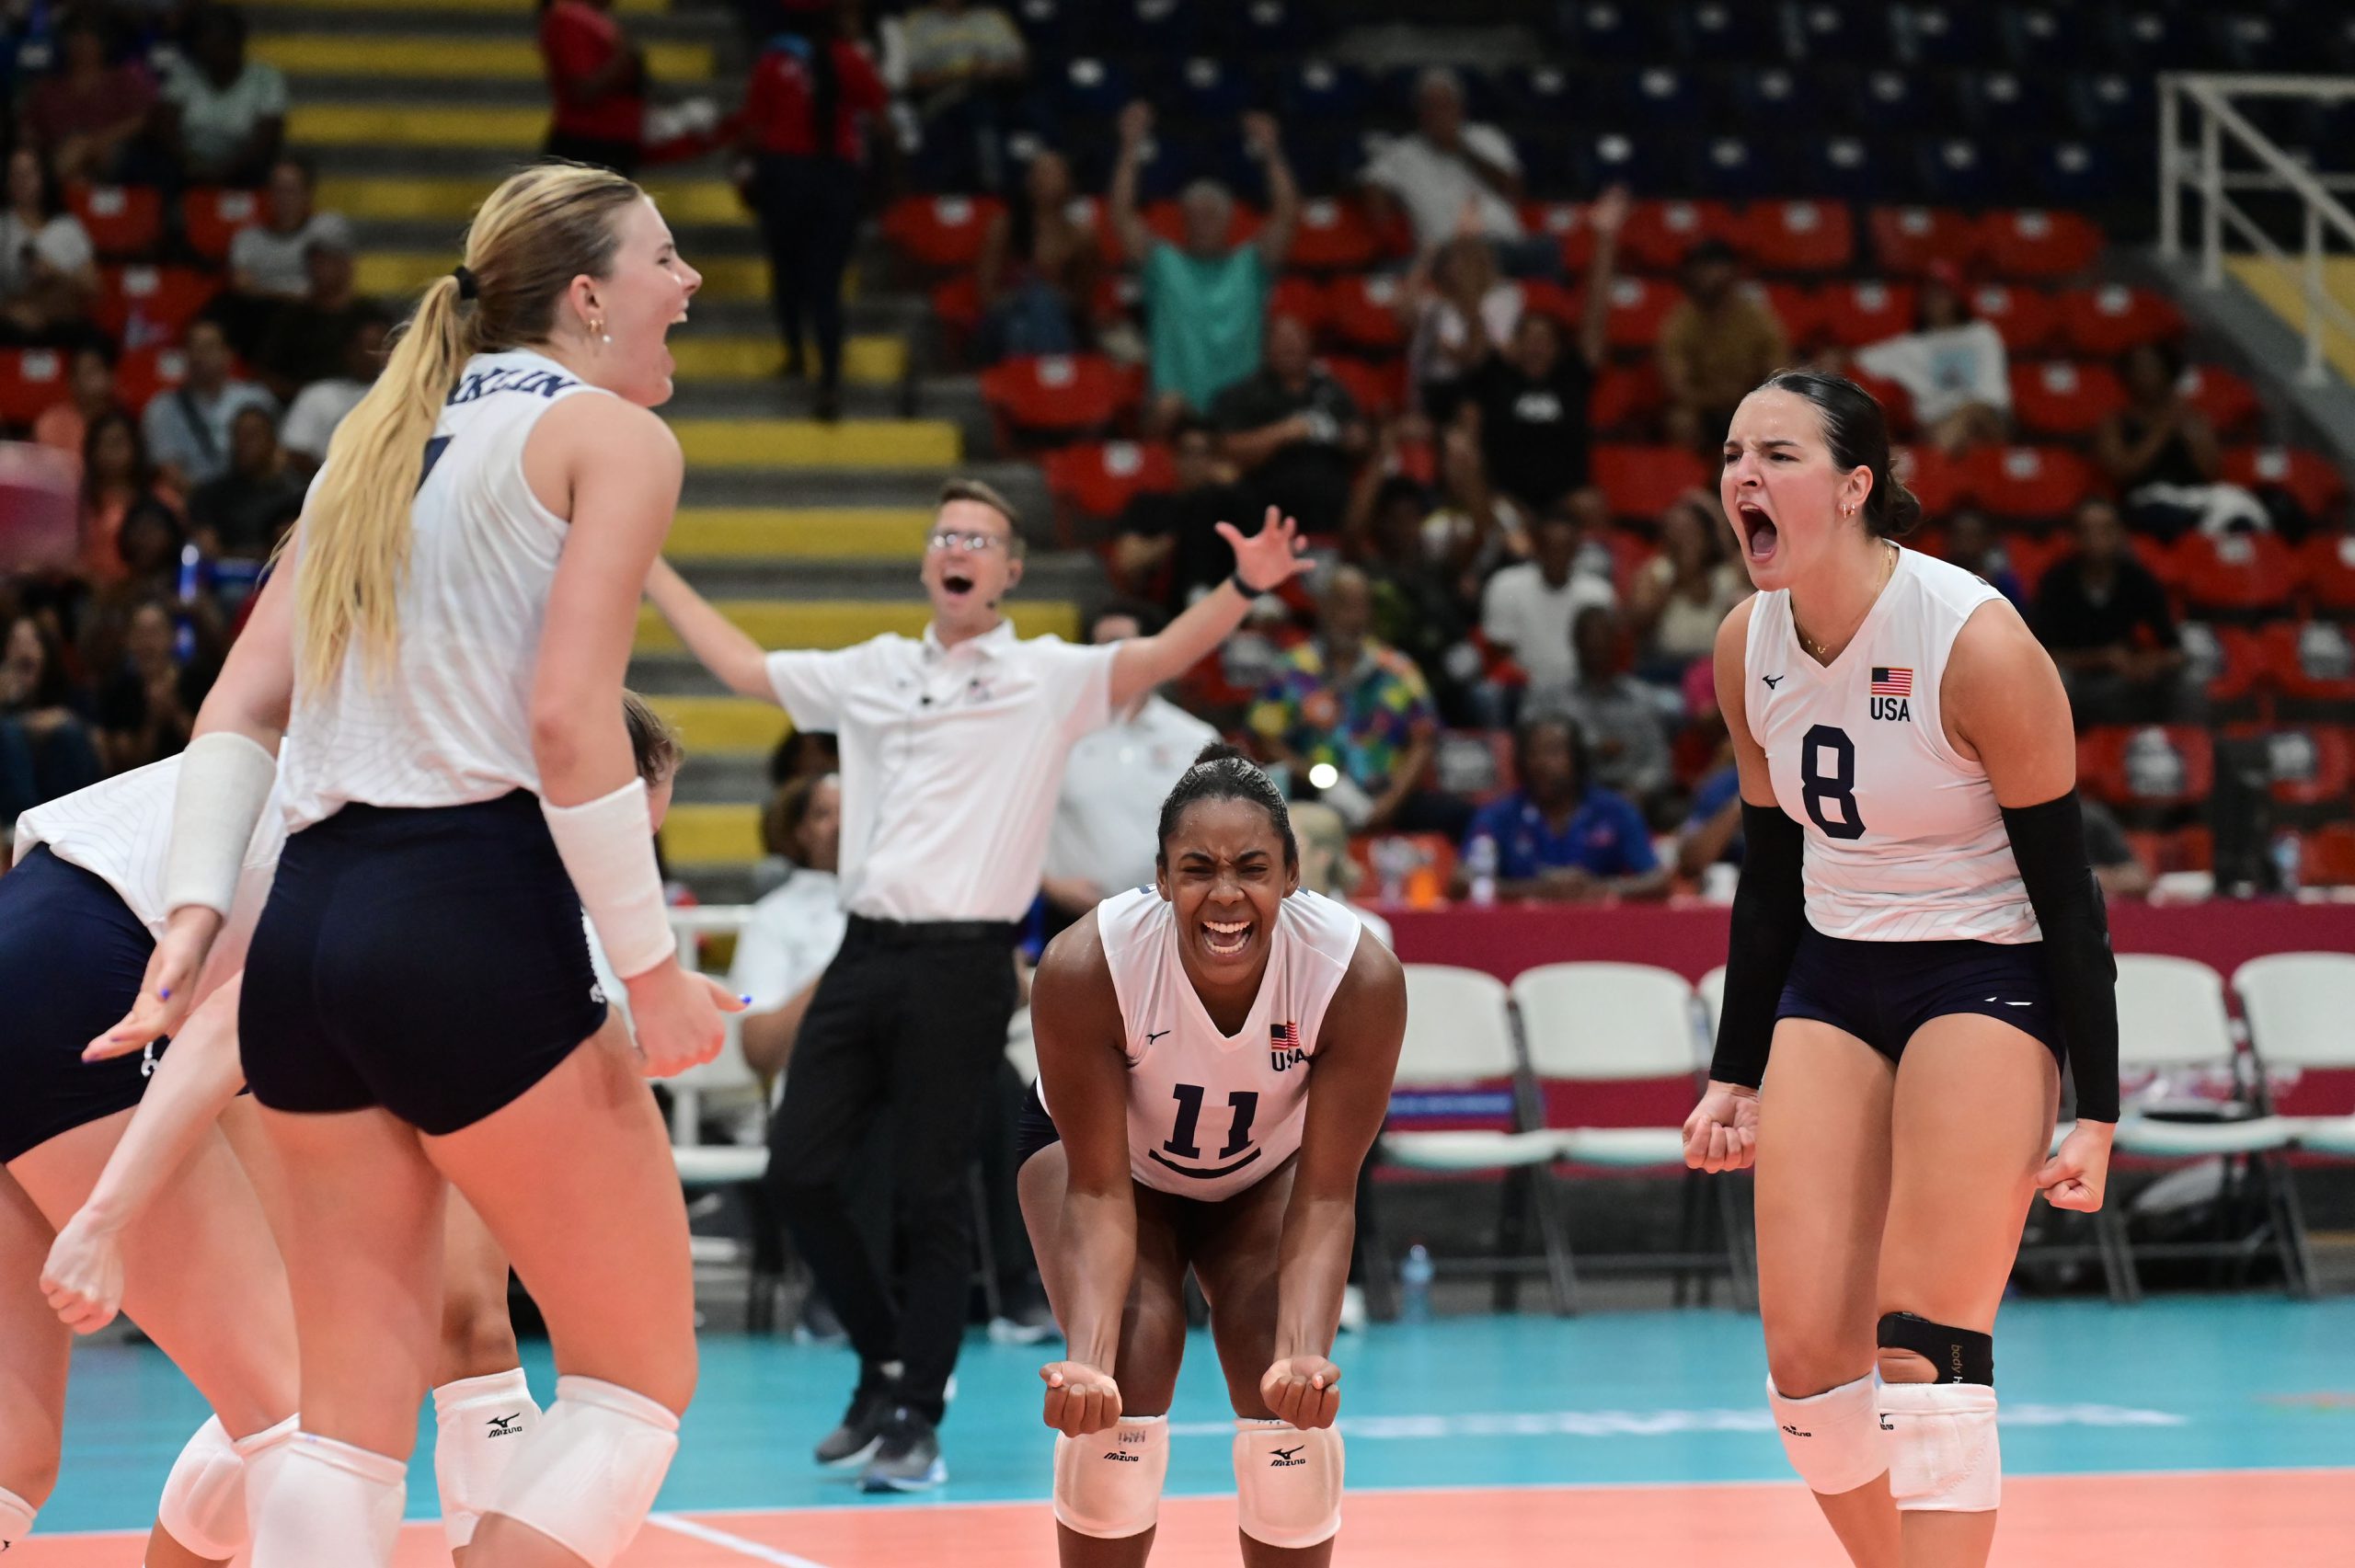 United States advances to the NORCECA Final Six Final